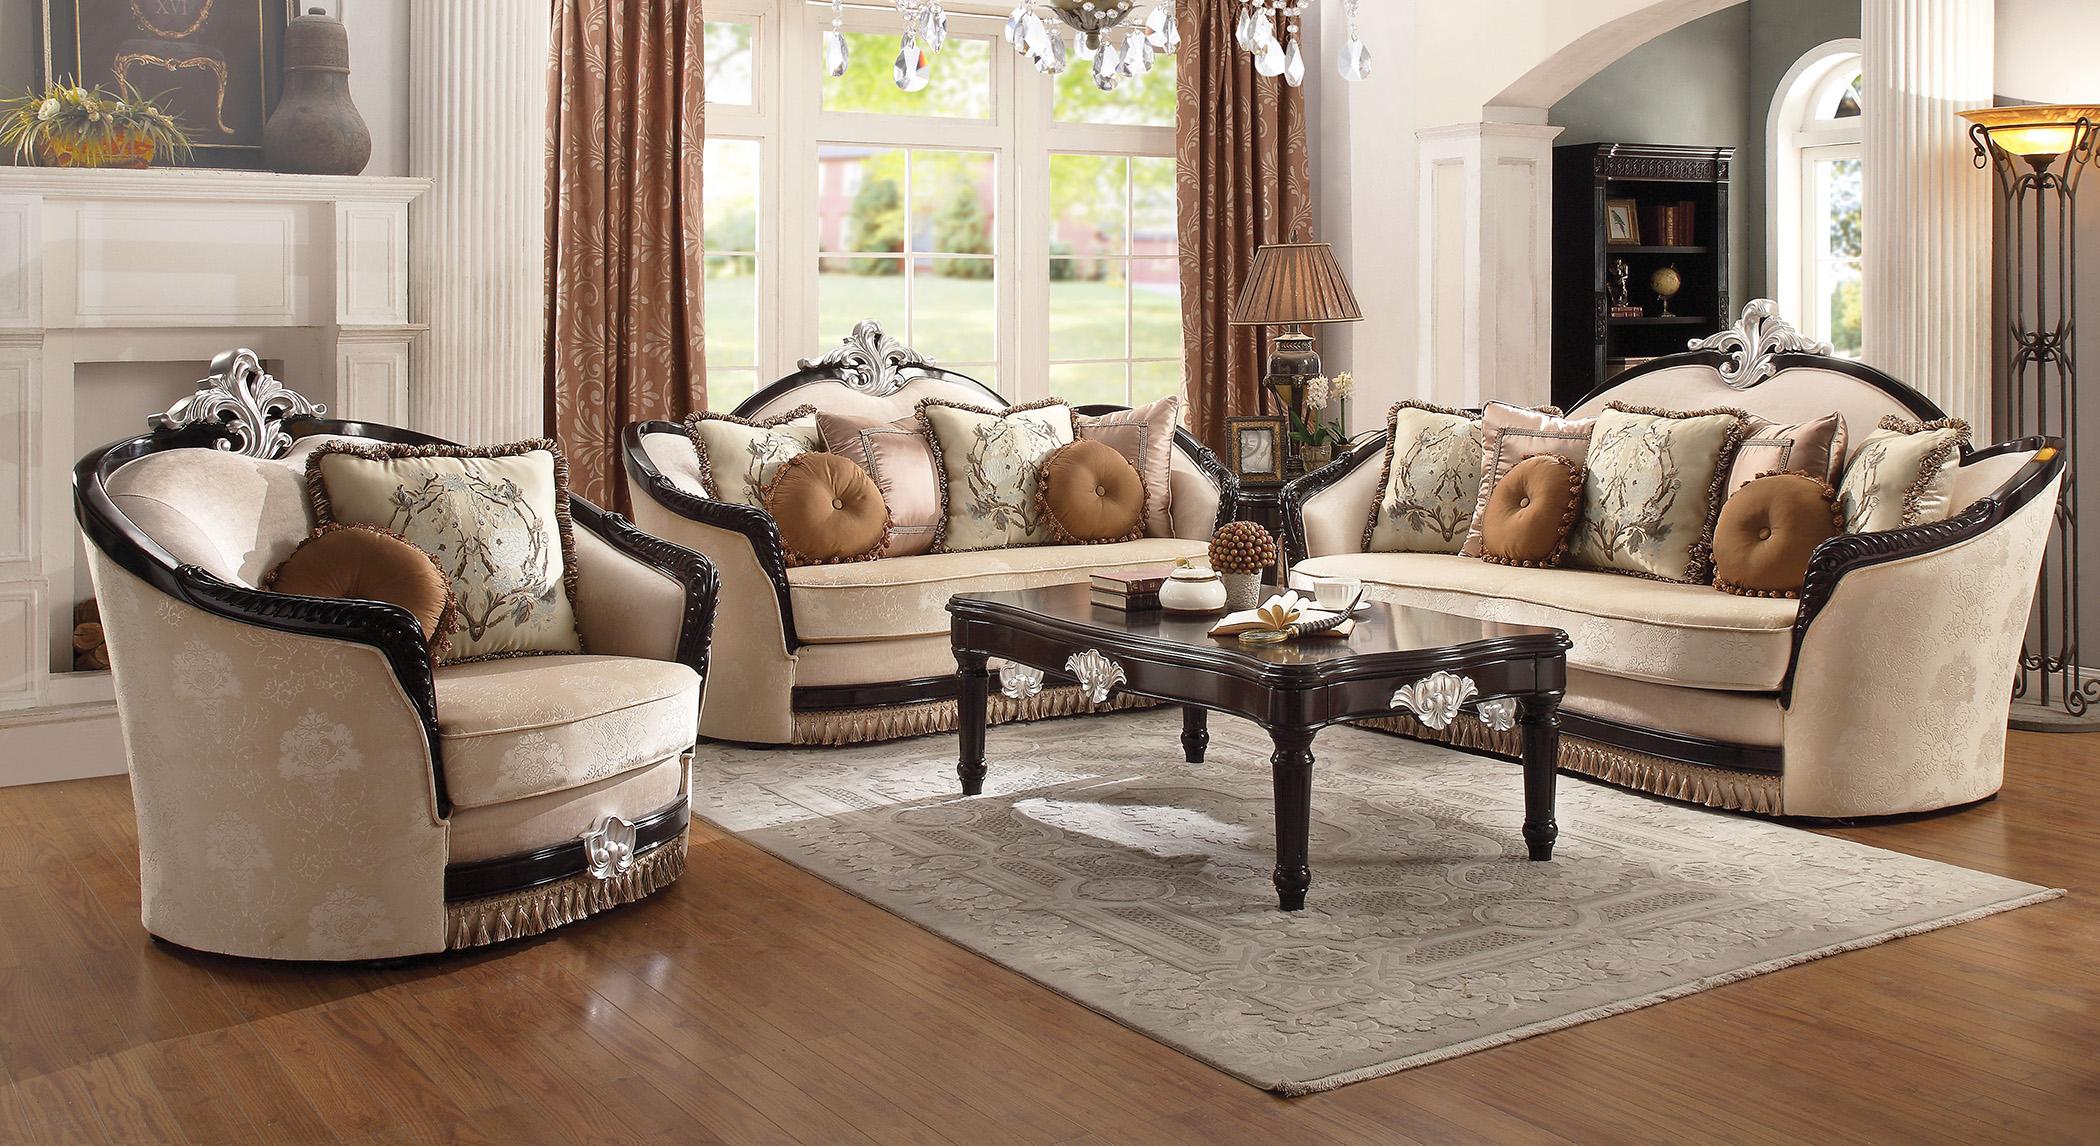 Classic, Traditional Sofa Loveseat Chair and Coffee Table Ernestine-52110 Ernestine-52110-Set-4 in Brown, Beige Fabric